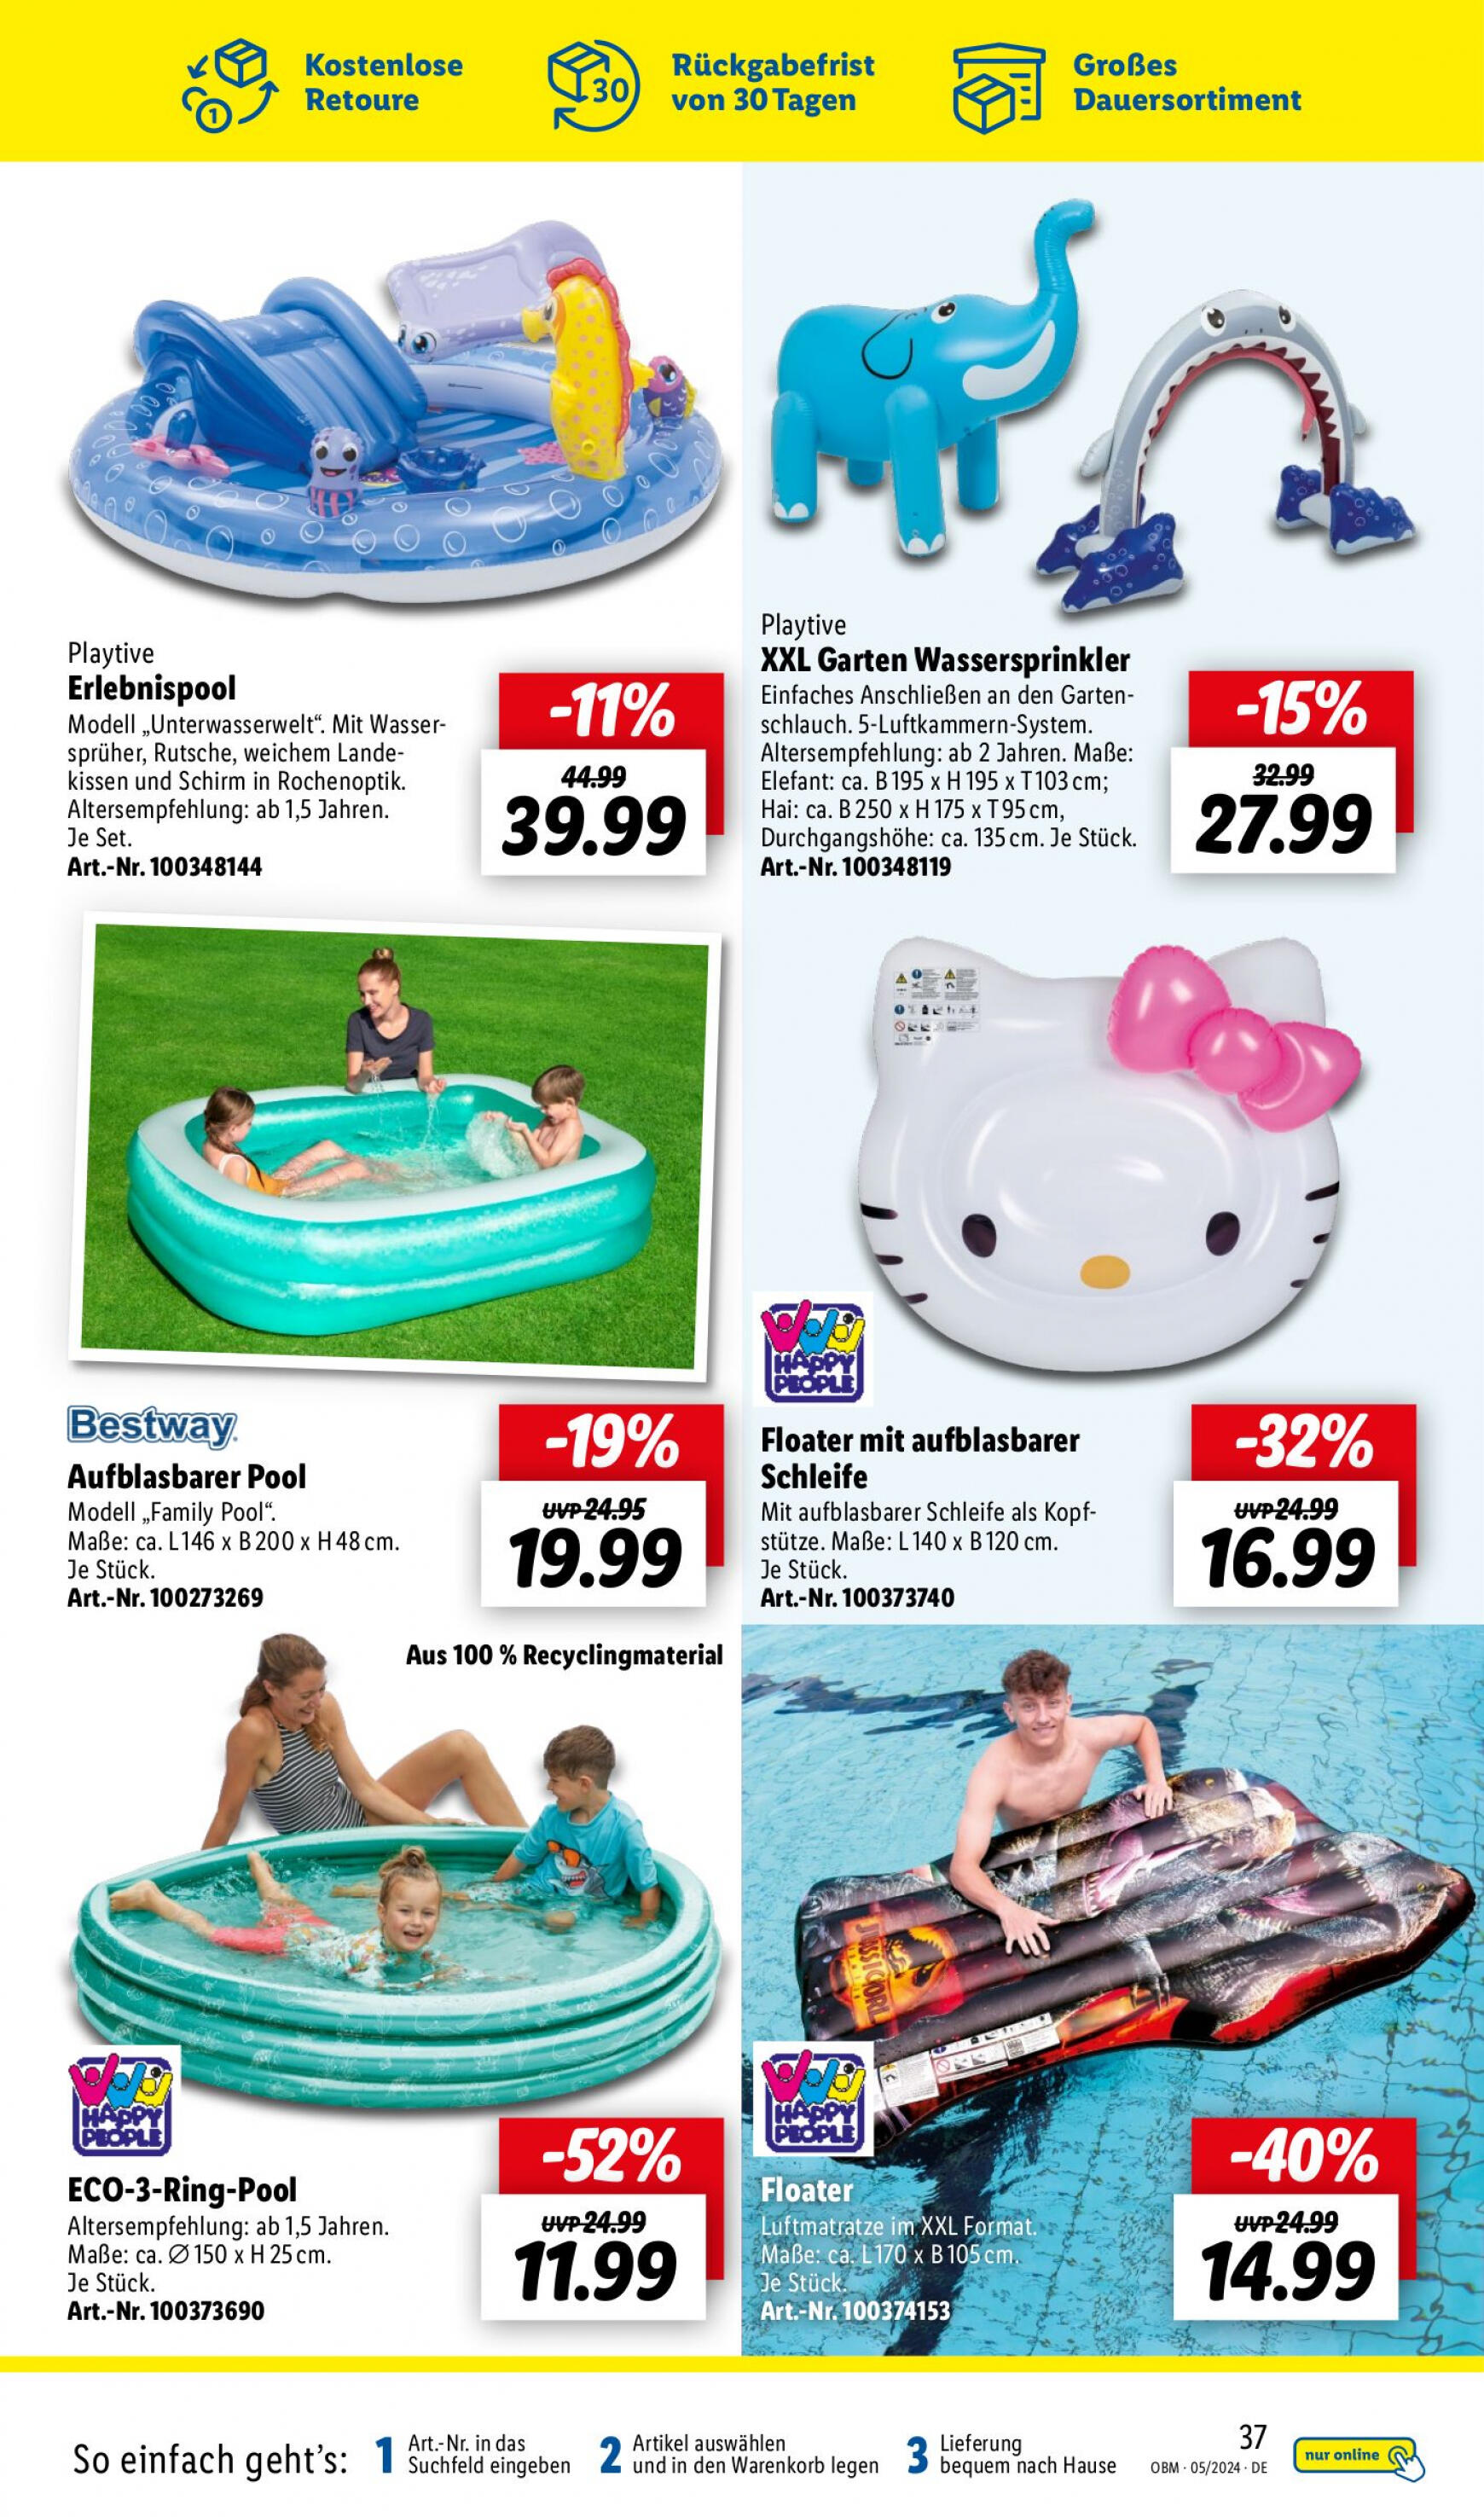 lidl - Flyer Lidl - Aktuelle Onlineshop-Highlights aktuell 01.05. - 31.05. - page: 37